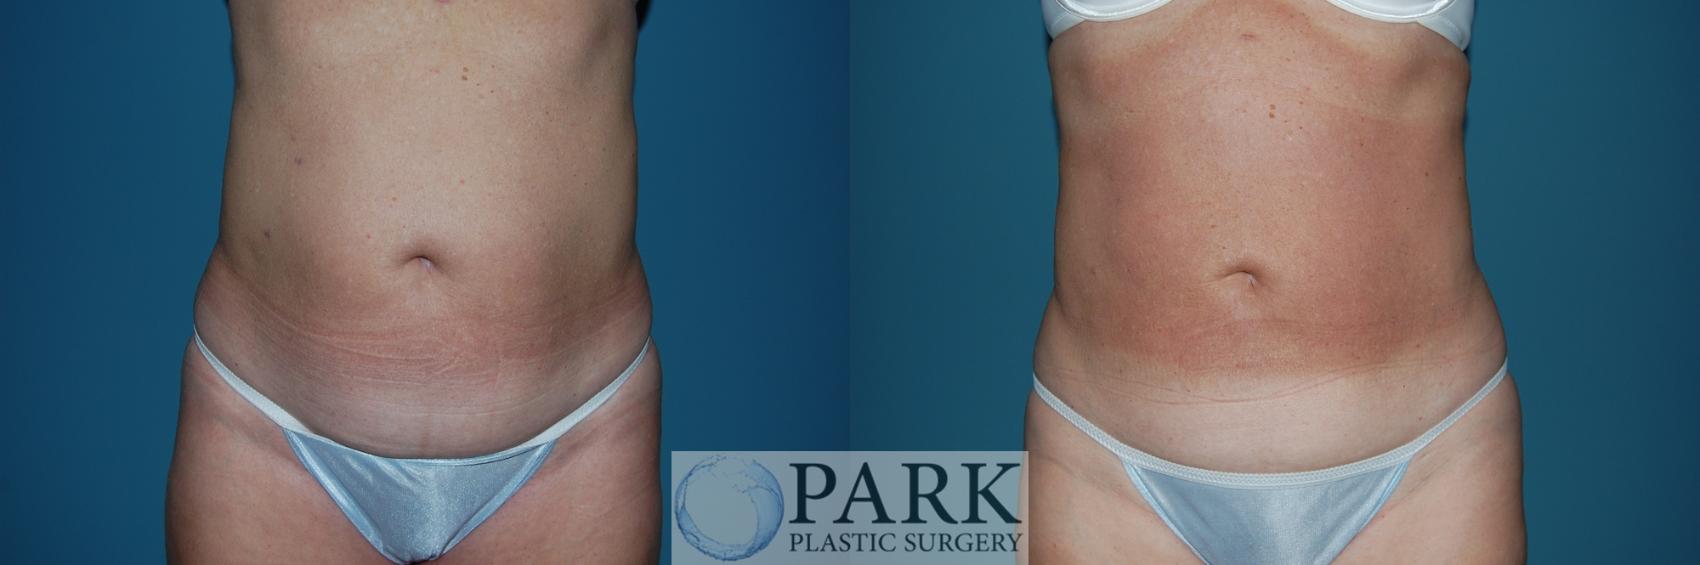 Before & After Liposuction Case 2 Front View in Rocky Mount, NC